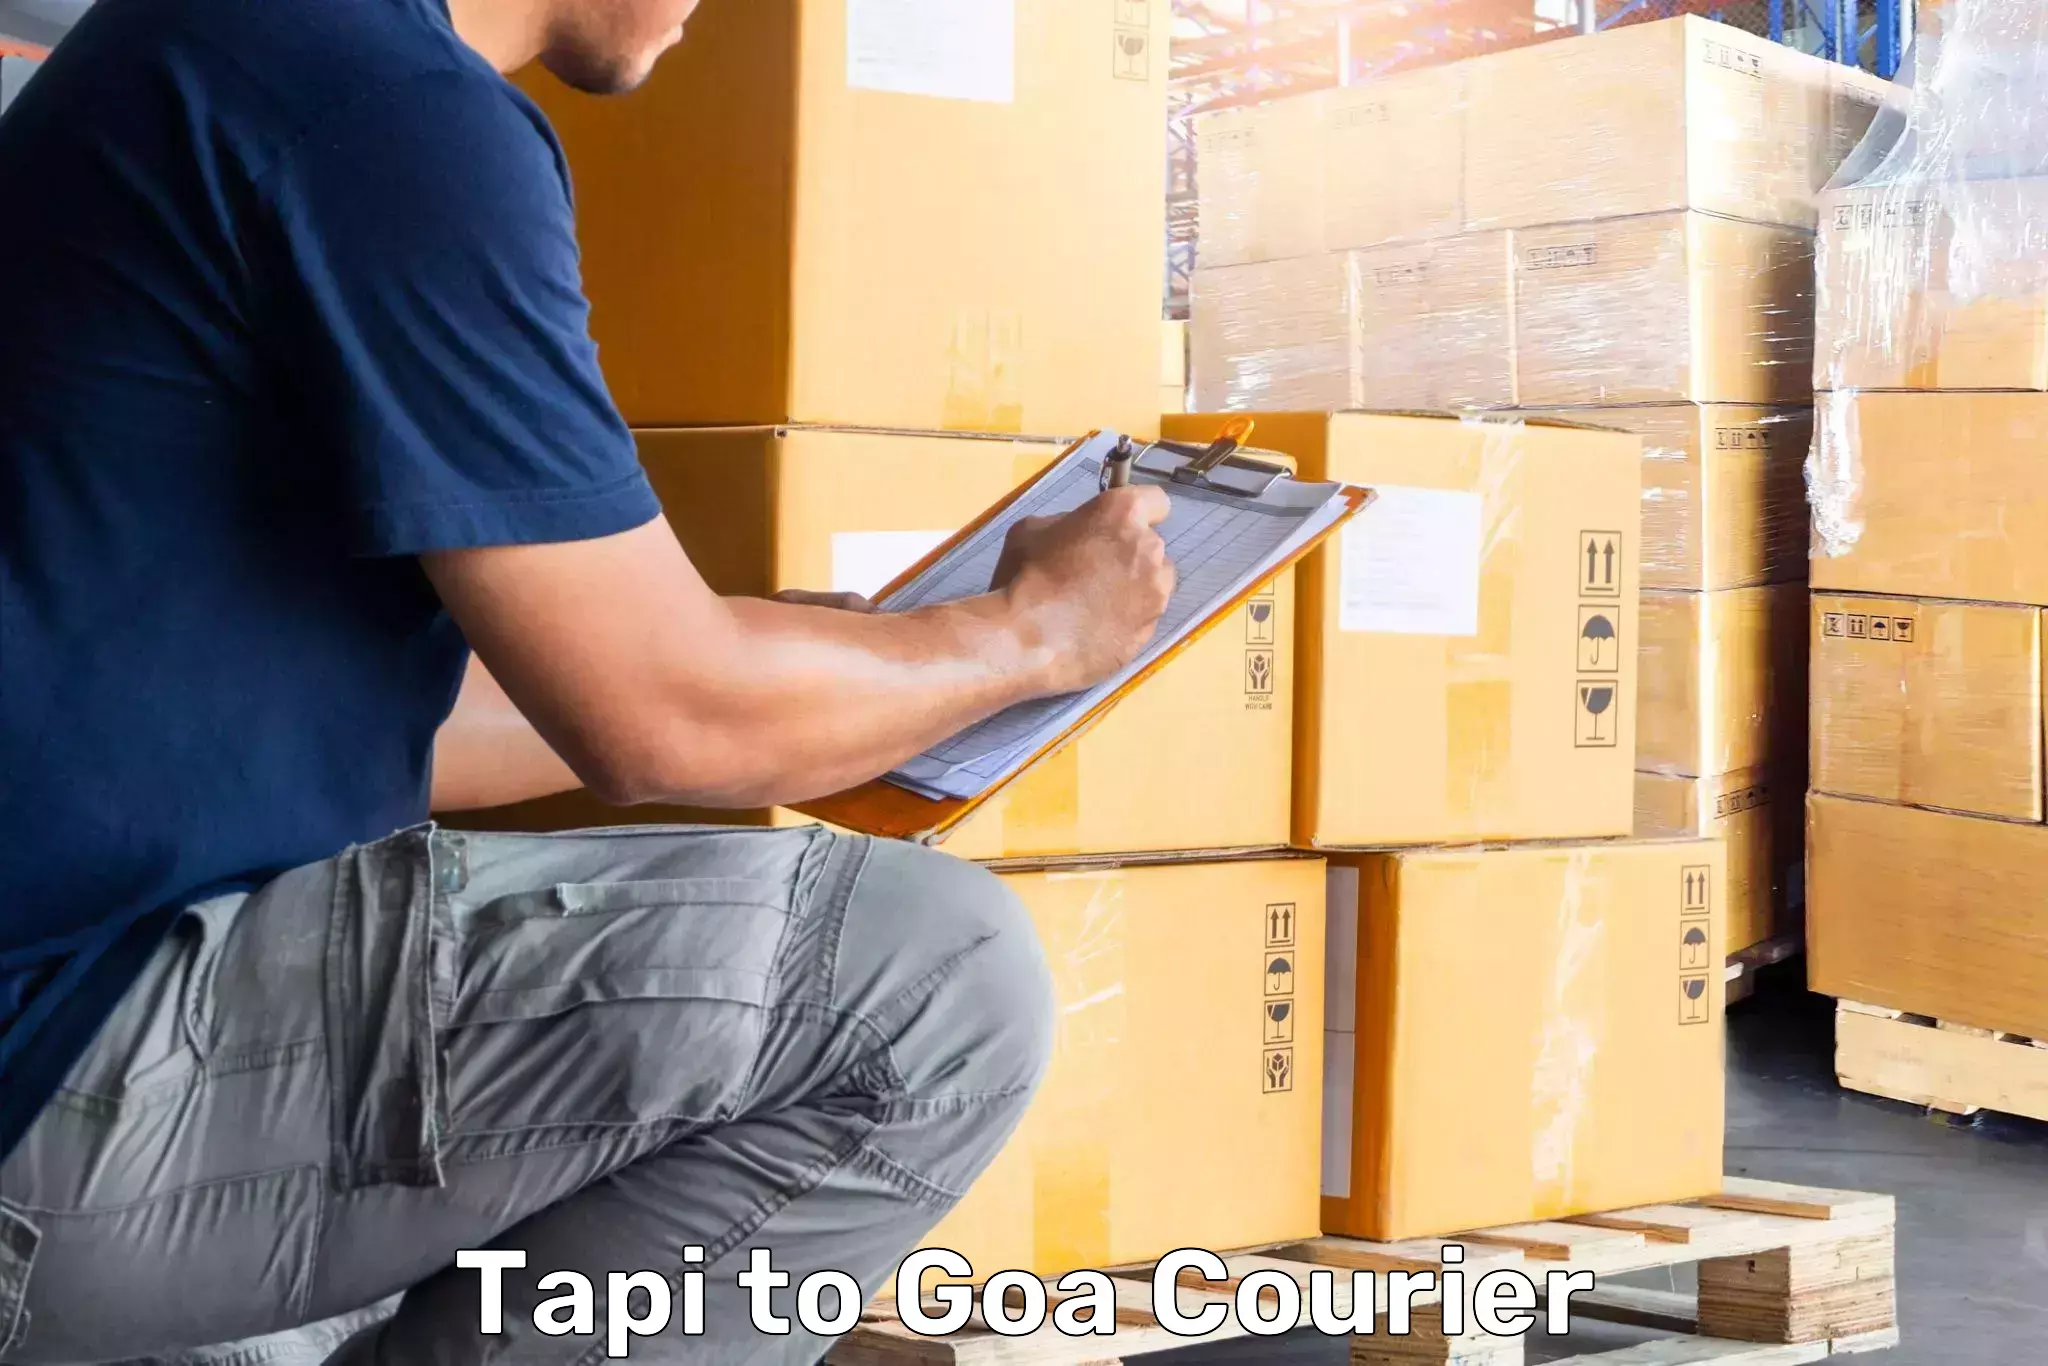 Luggage transport consultancy Tapi to Goa